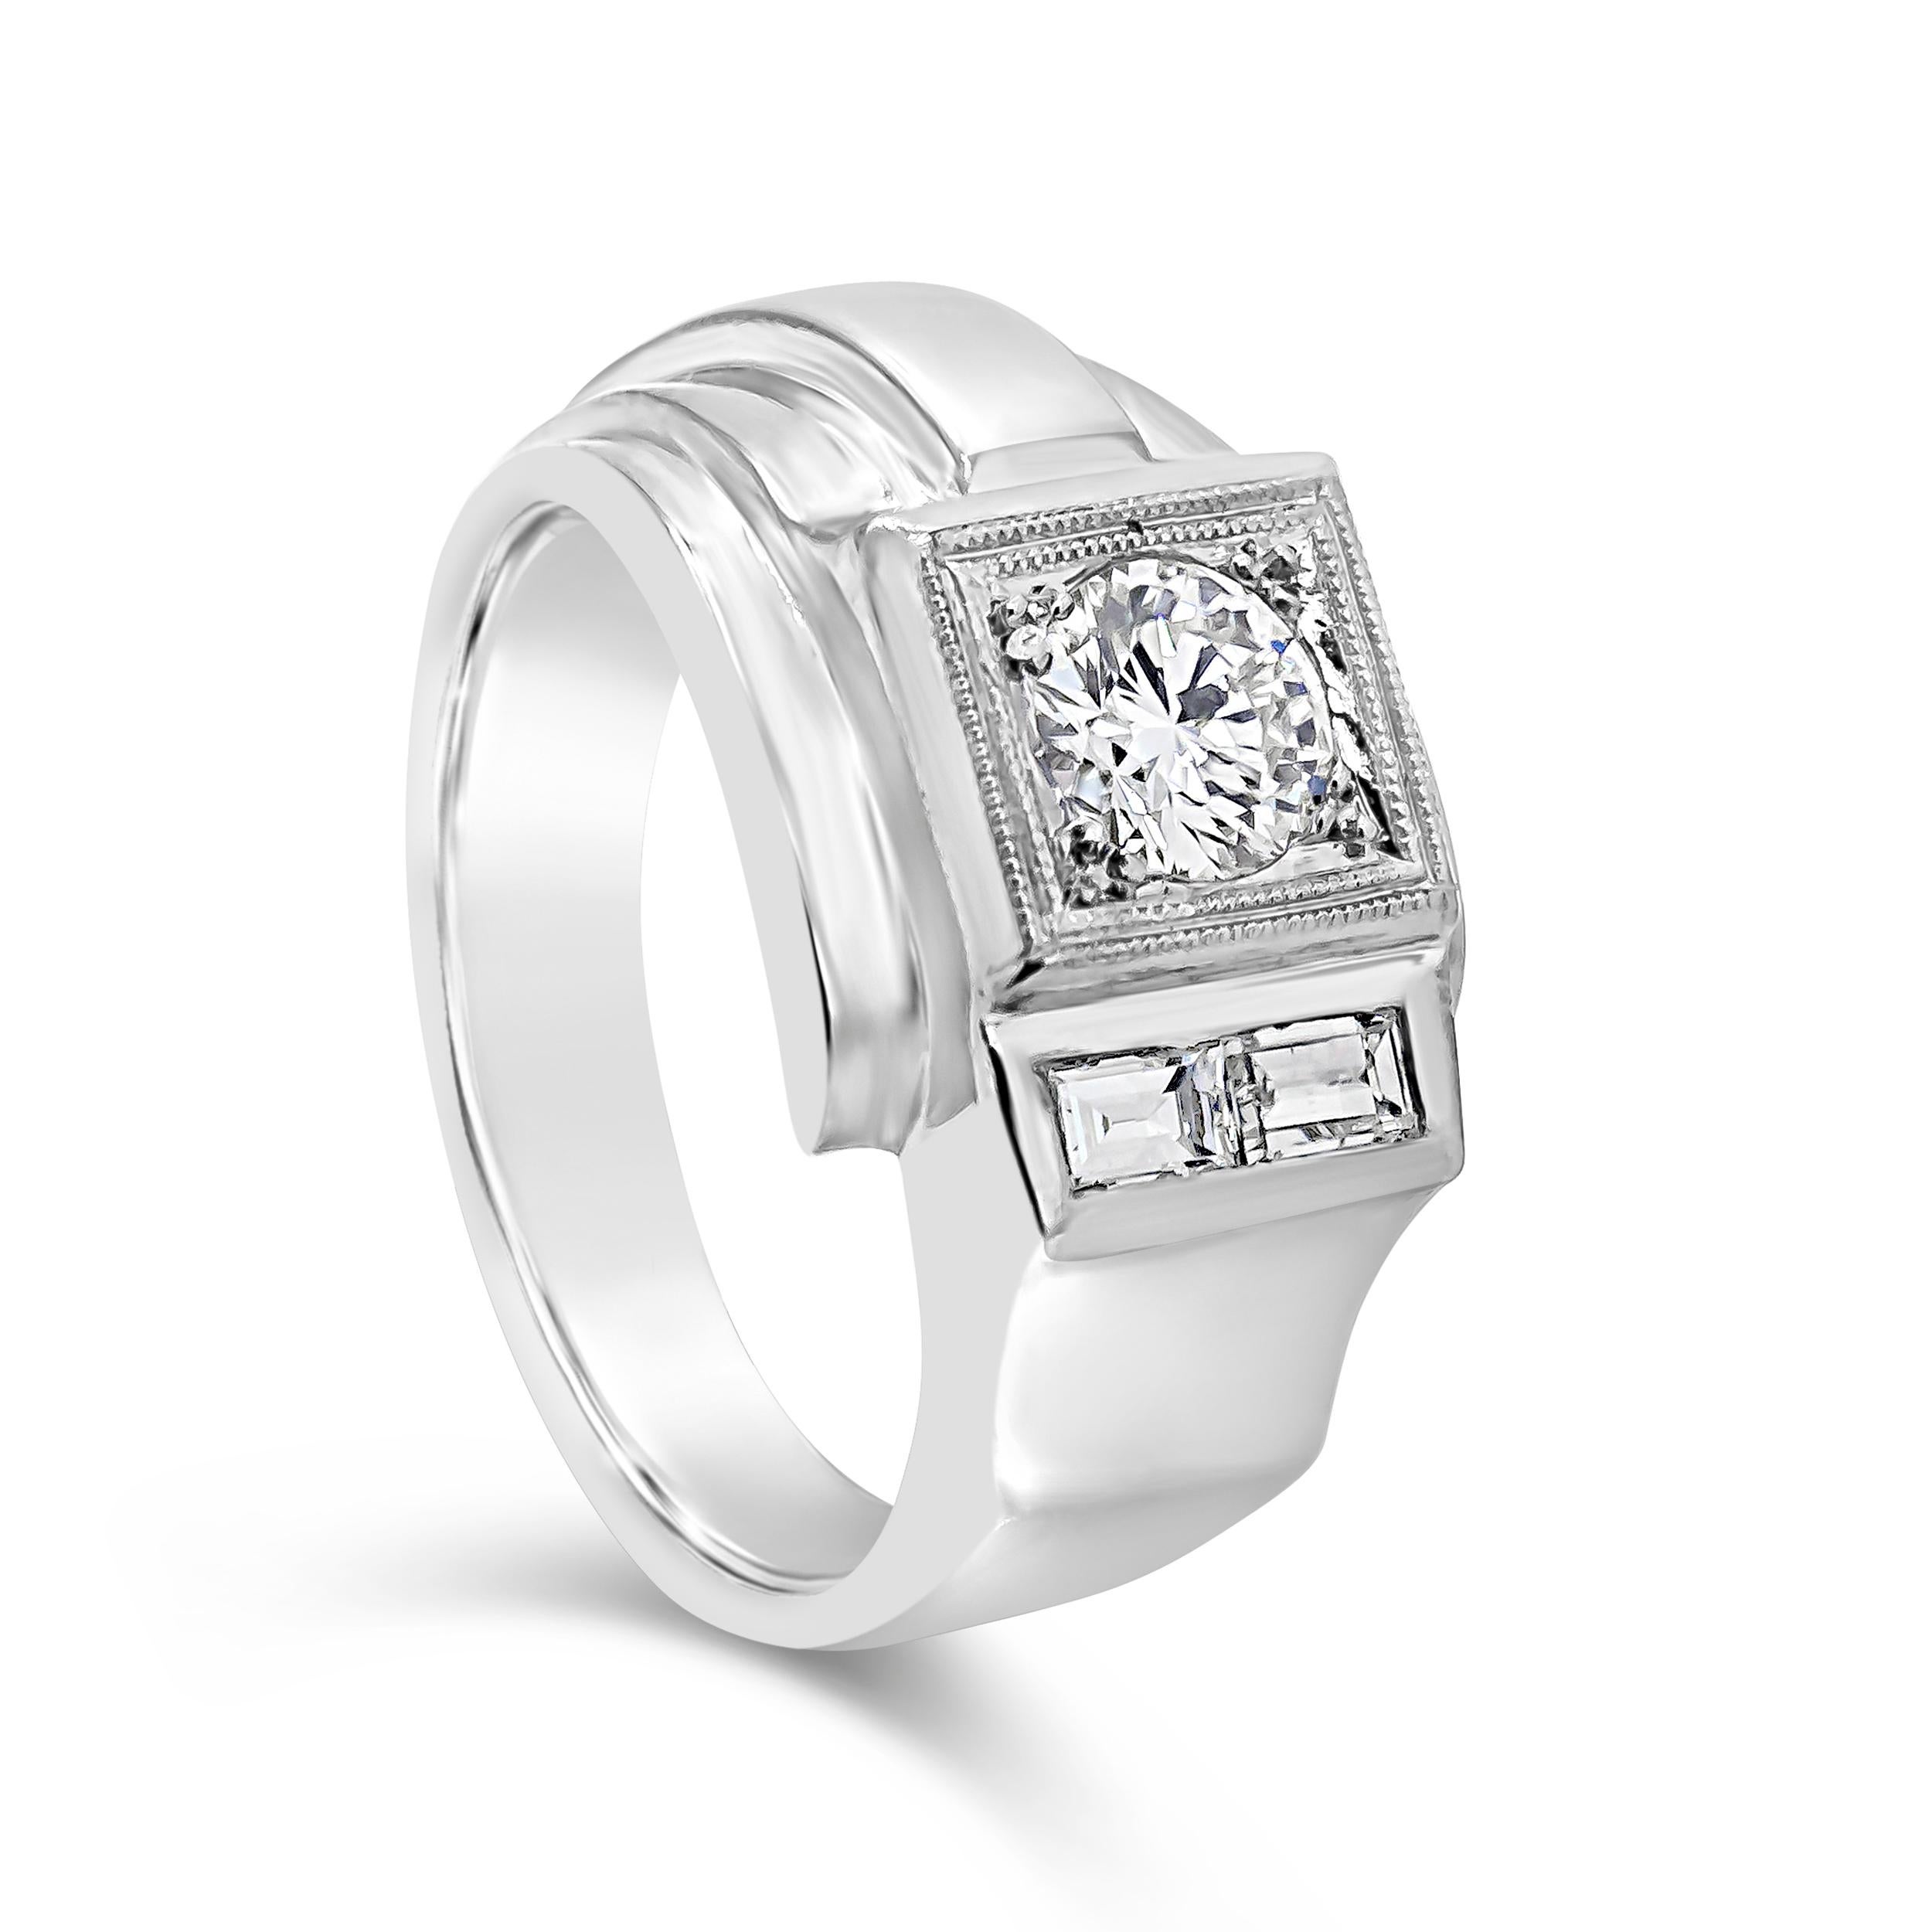 A fashionable men's ring showcasing a 0.70 carats round brilliant diamonds, accented by two baguette diamonds weighing 0.35 carats total. Set in a unique and modern design made in 14K white gold. Size 9.75 US

Style available in different price